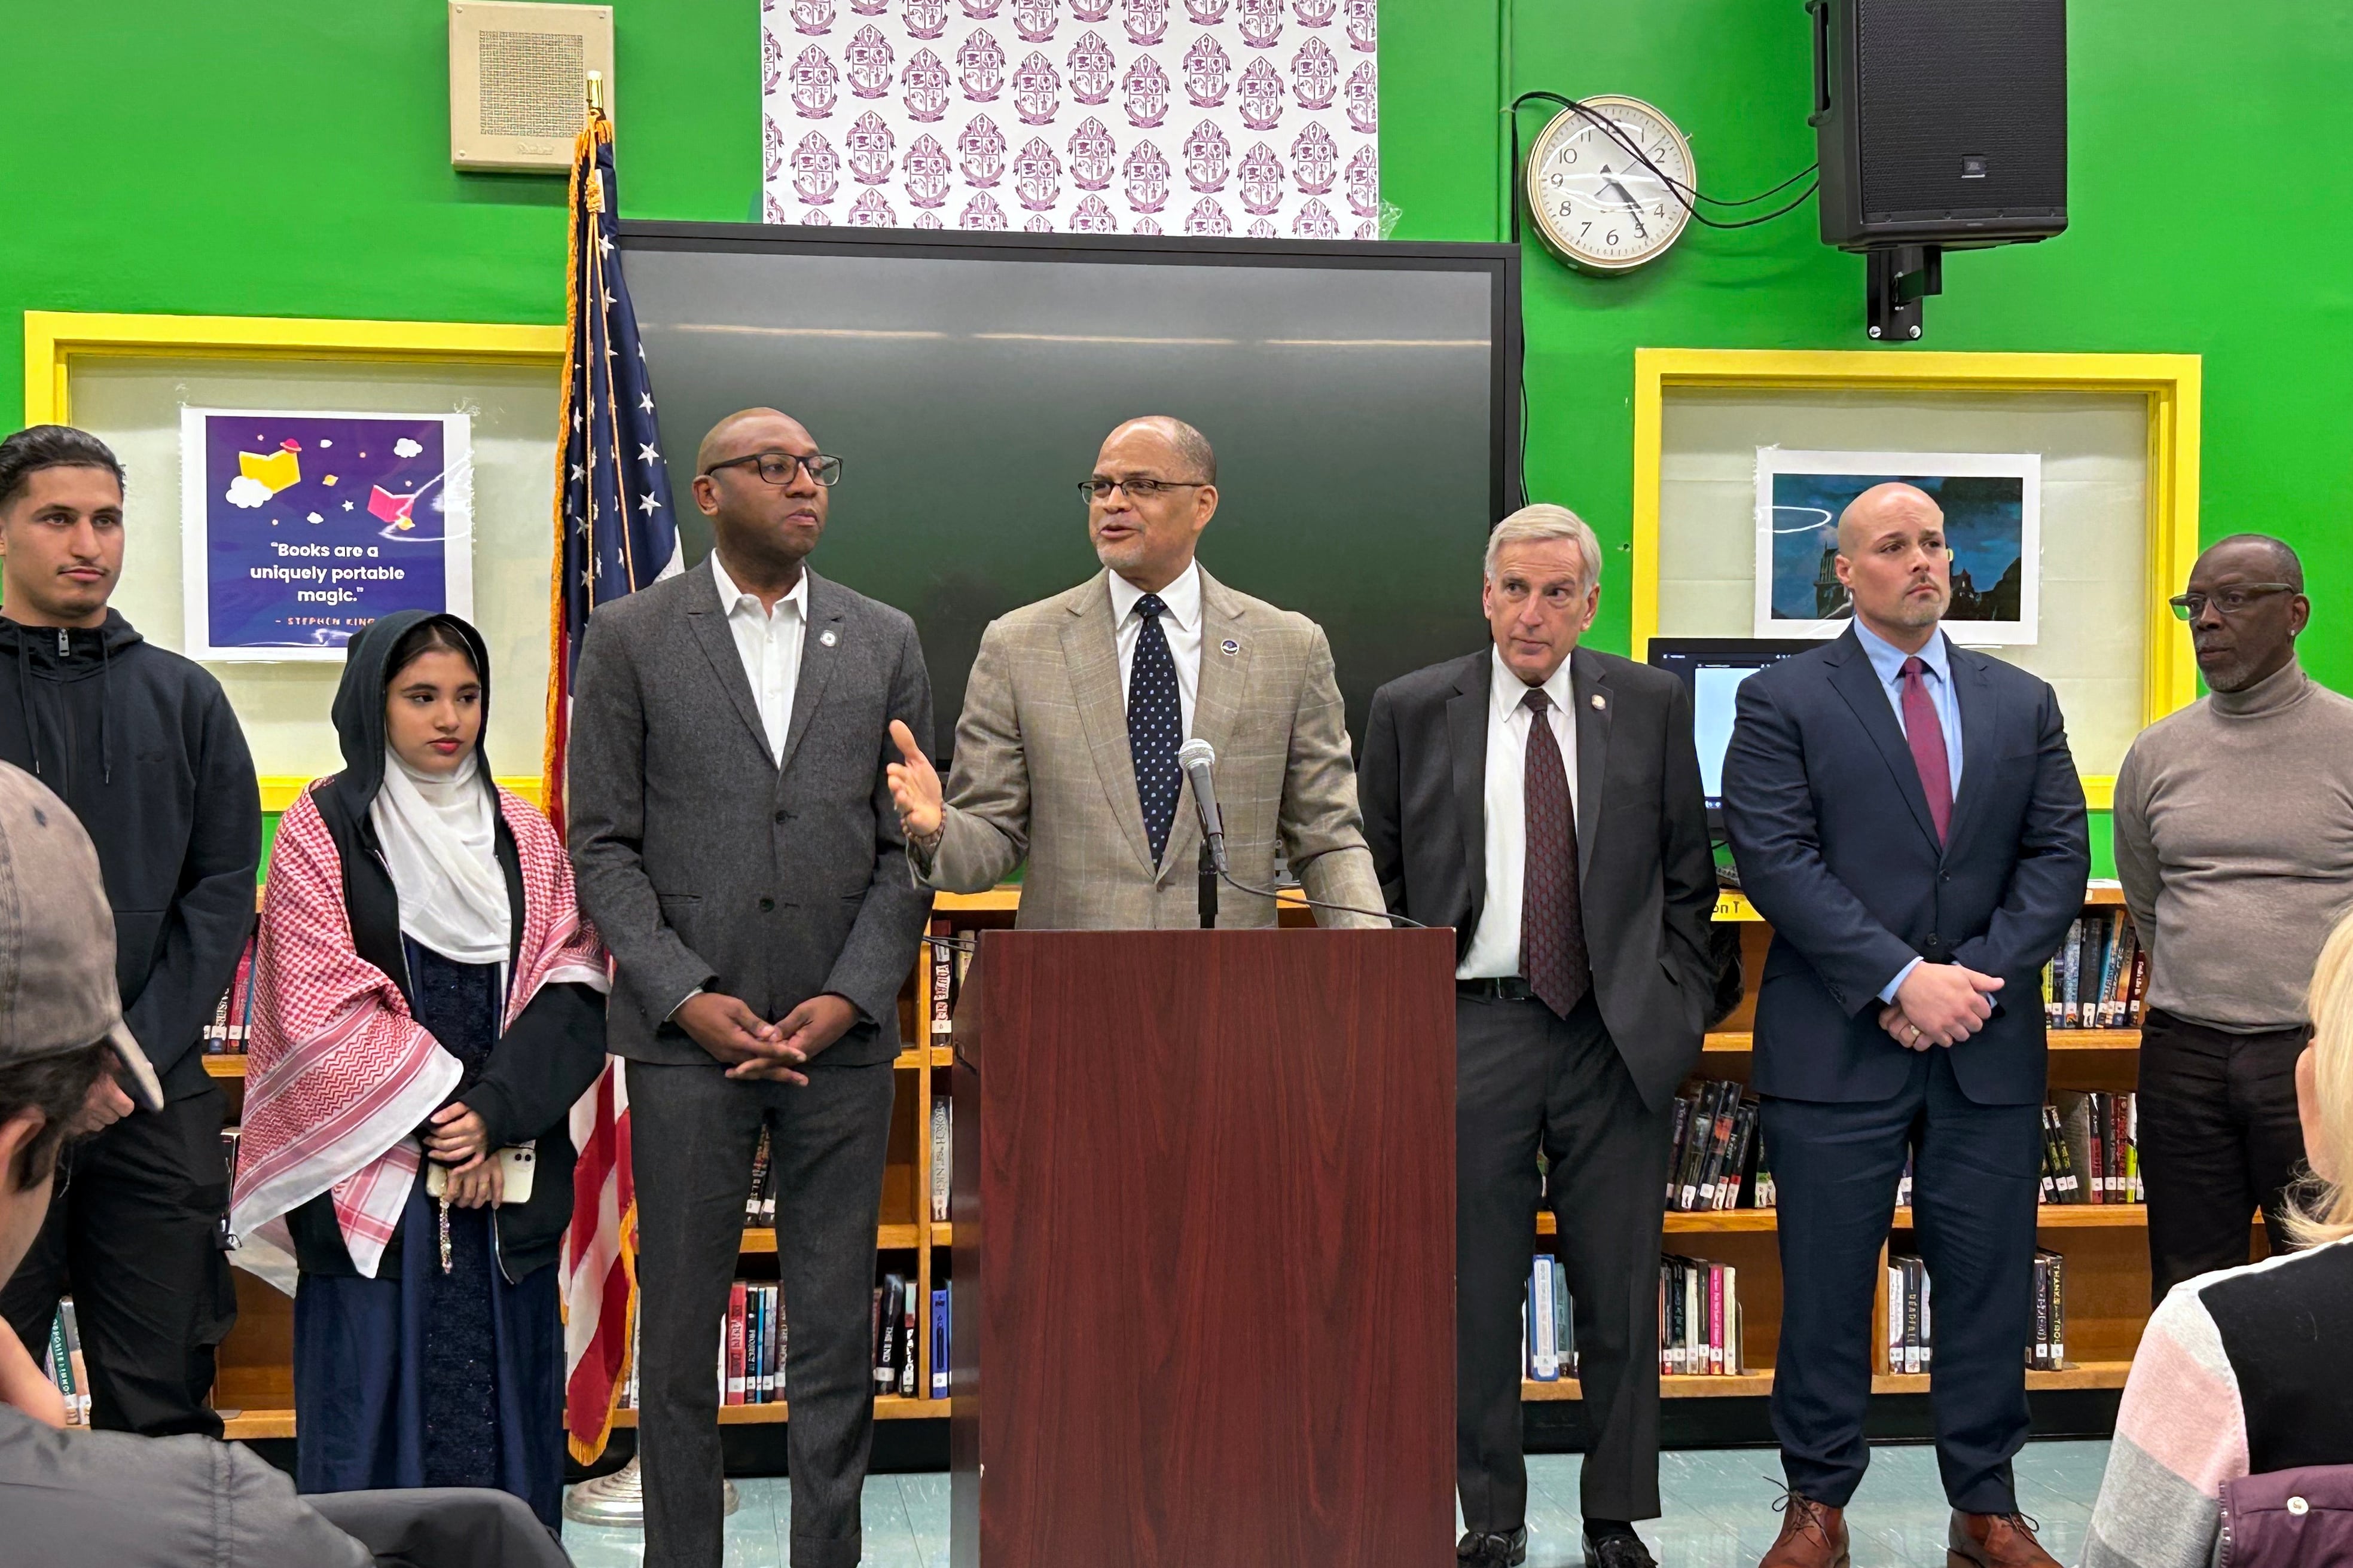 Seven people stand side by side while the person in the middle speaks at a podium. There is a large, black, computer screen, a clock and some posters on the wall in the background.